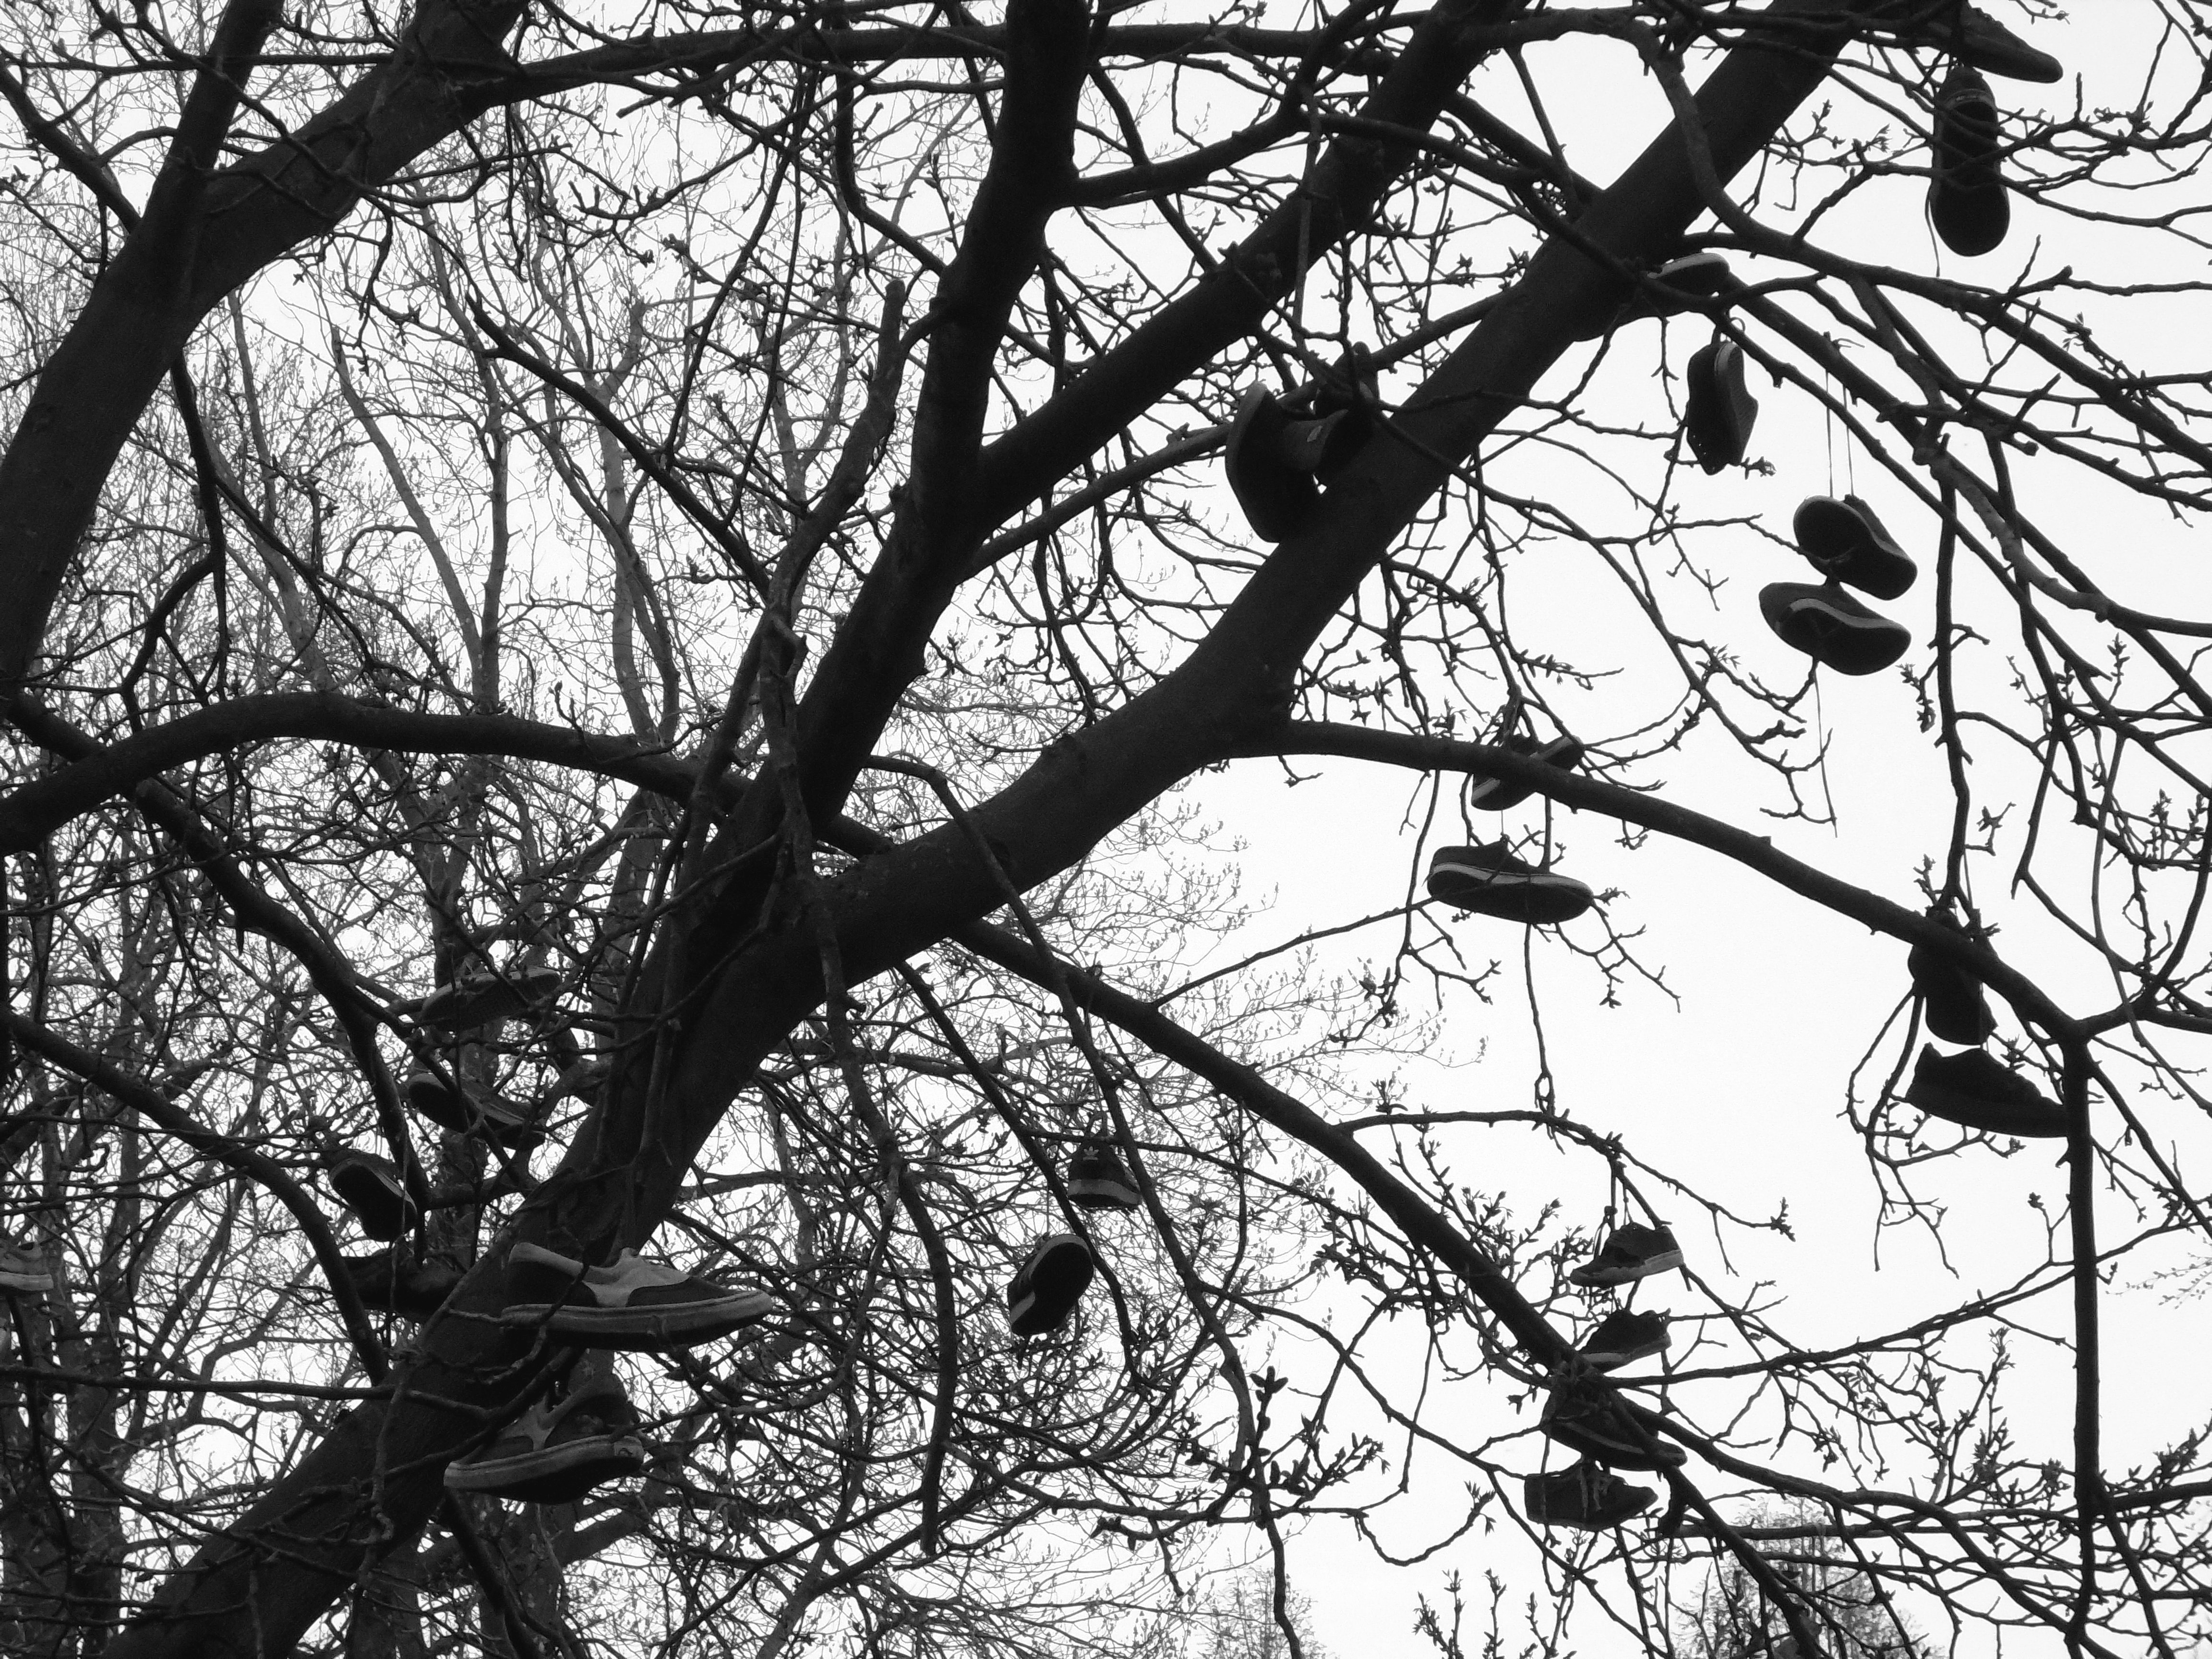 pairs of shoes lot on tree